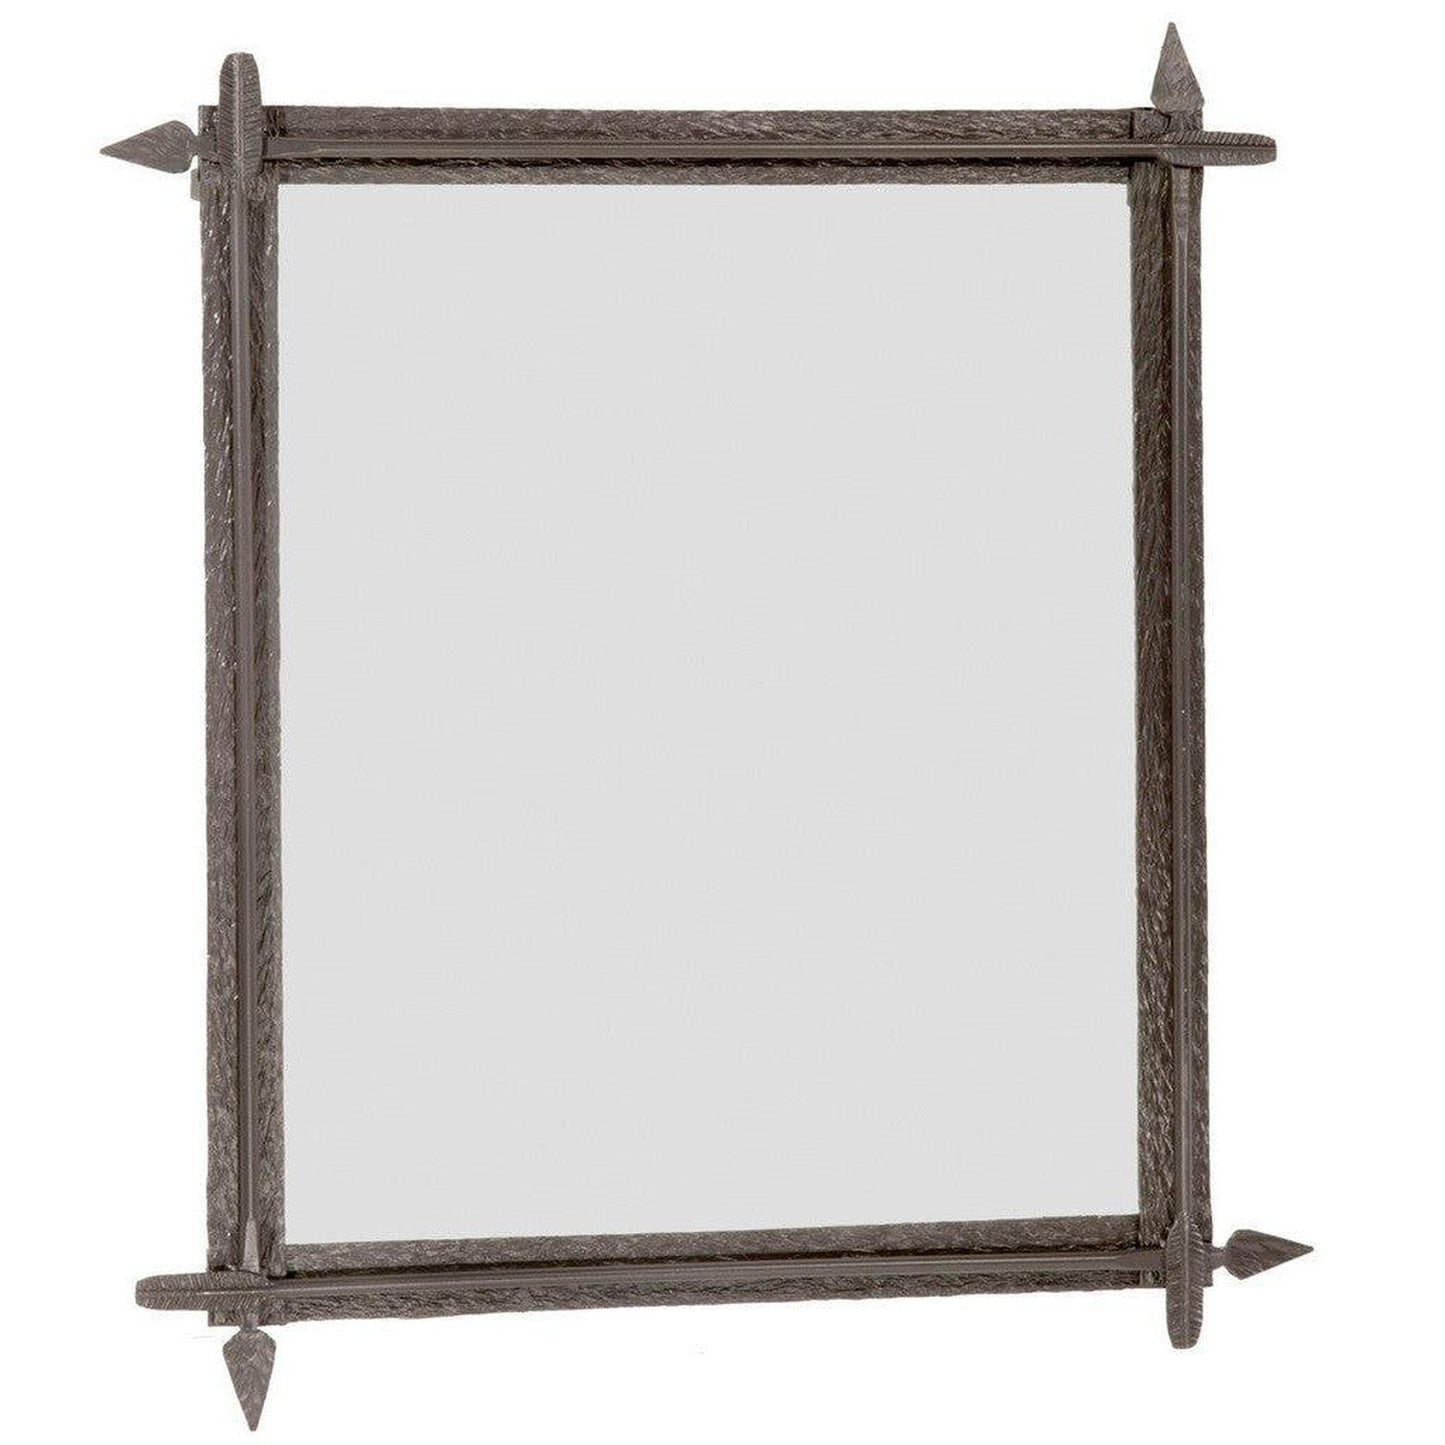 Stone County Ironworks Quapaw 31" x 43" Large Woodland Brown Iron Wall Mirror With Copper Iron Accent